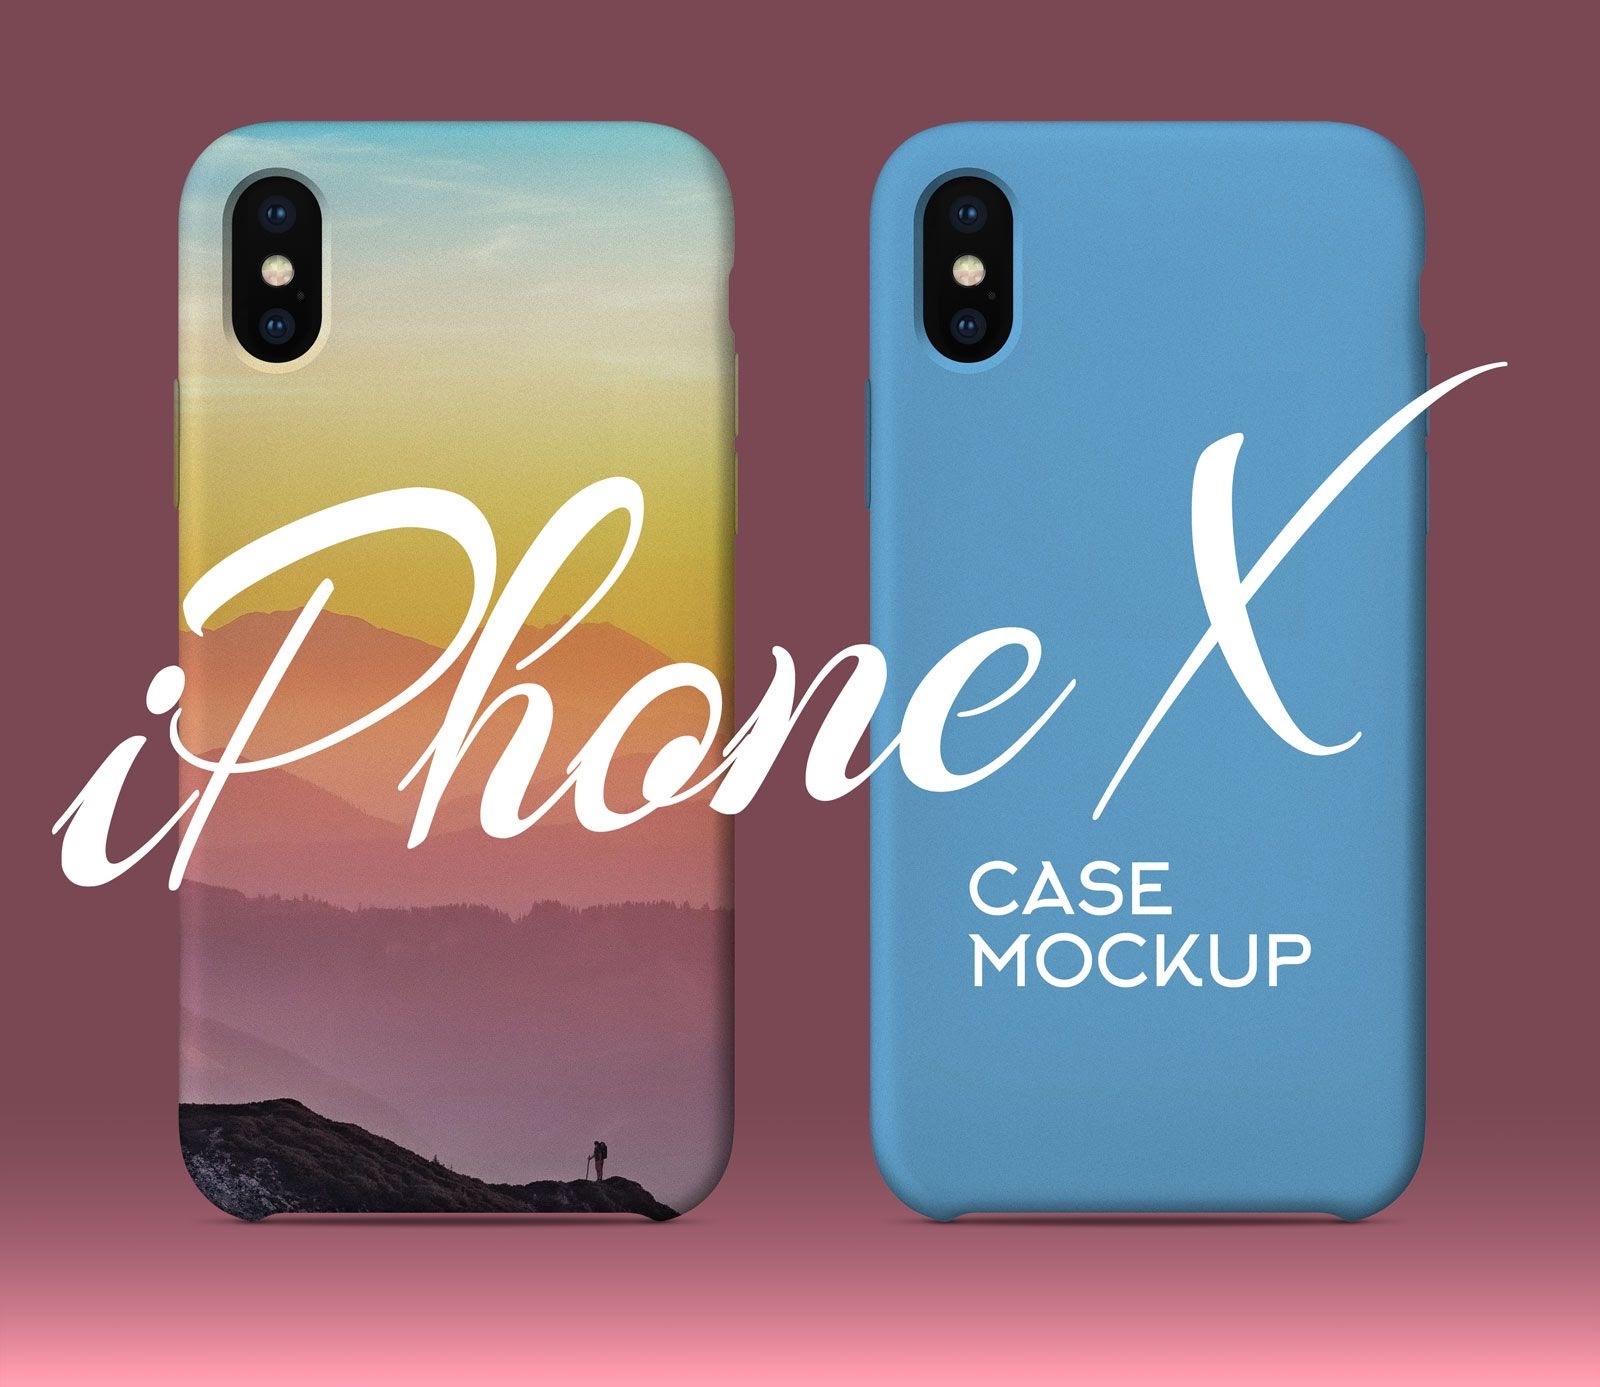 Download 114+ Iphone Mockup Free Best Quality Mockups PSD